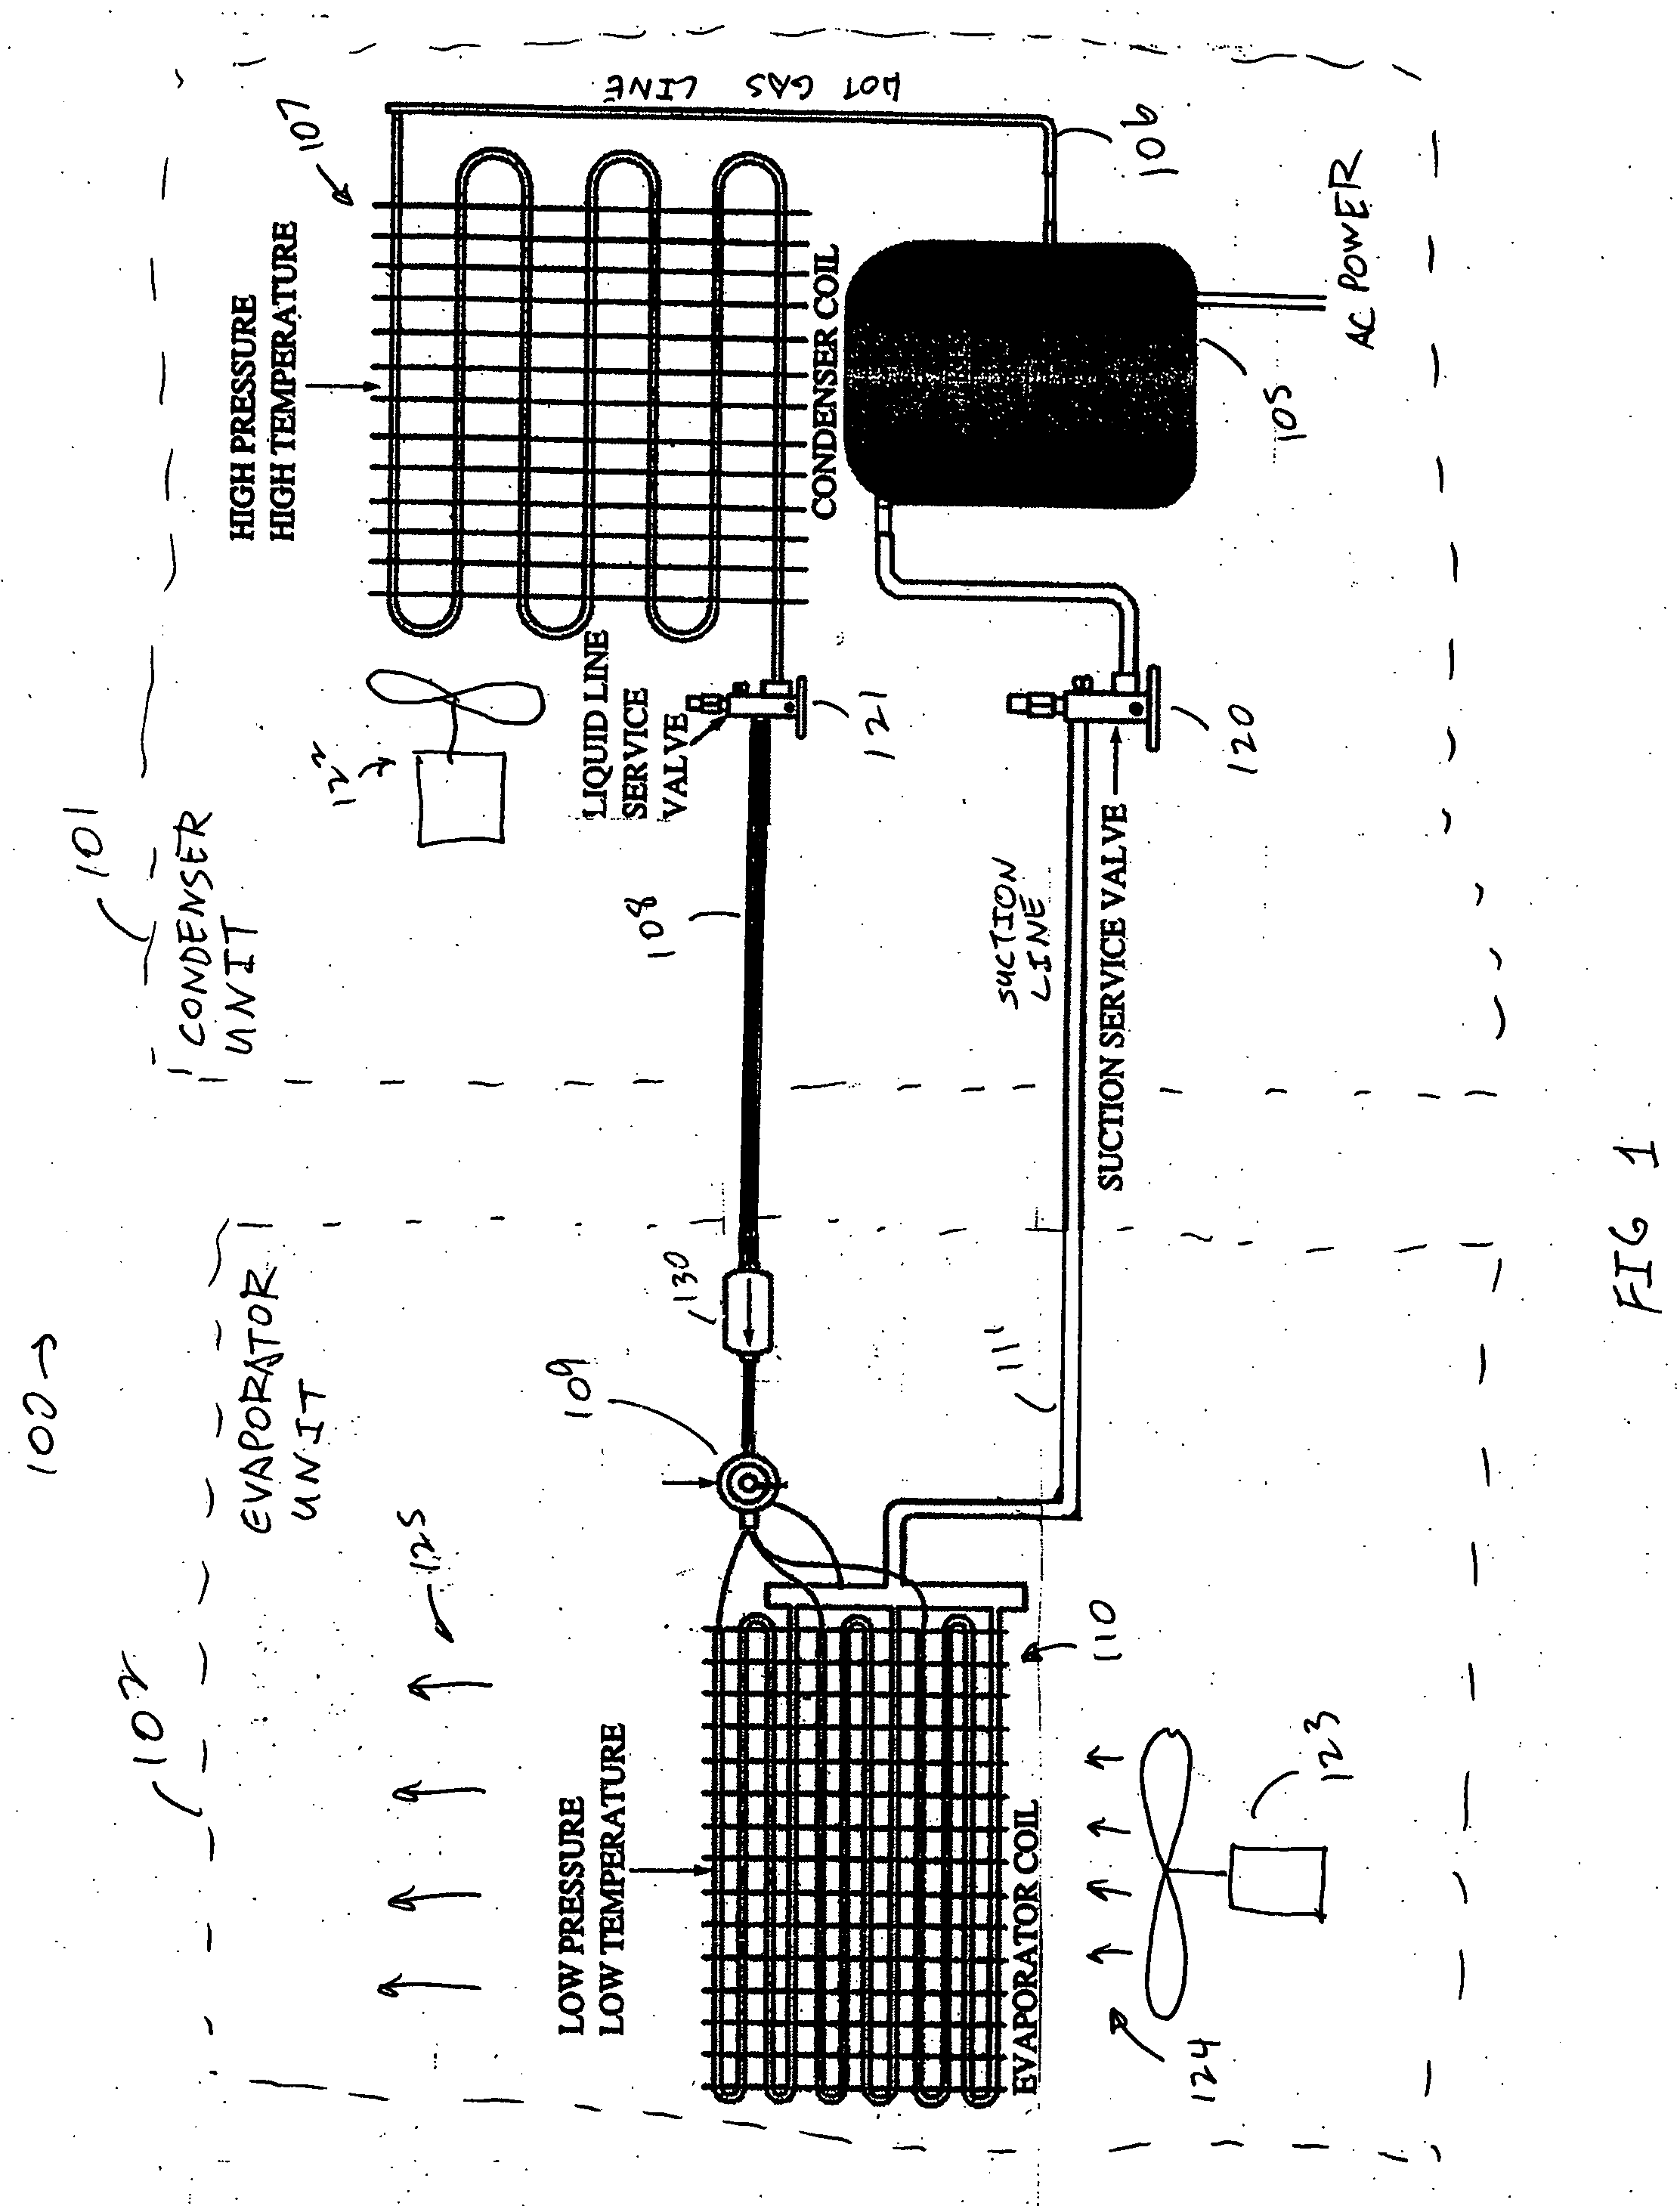 Method and apparatus for load reduction in an electric power system